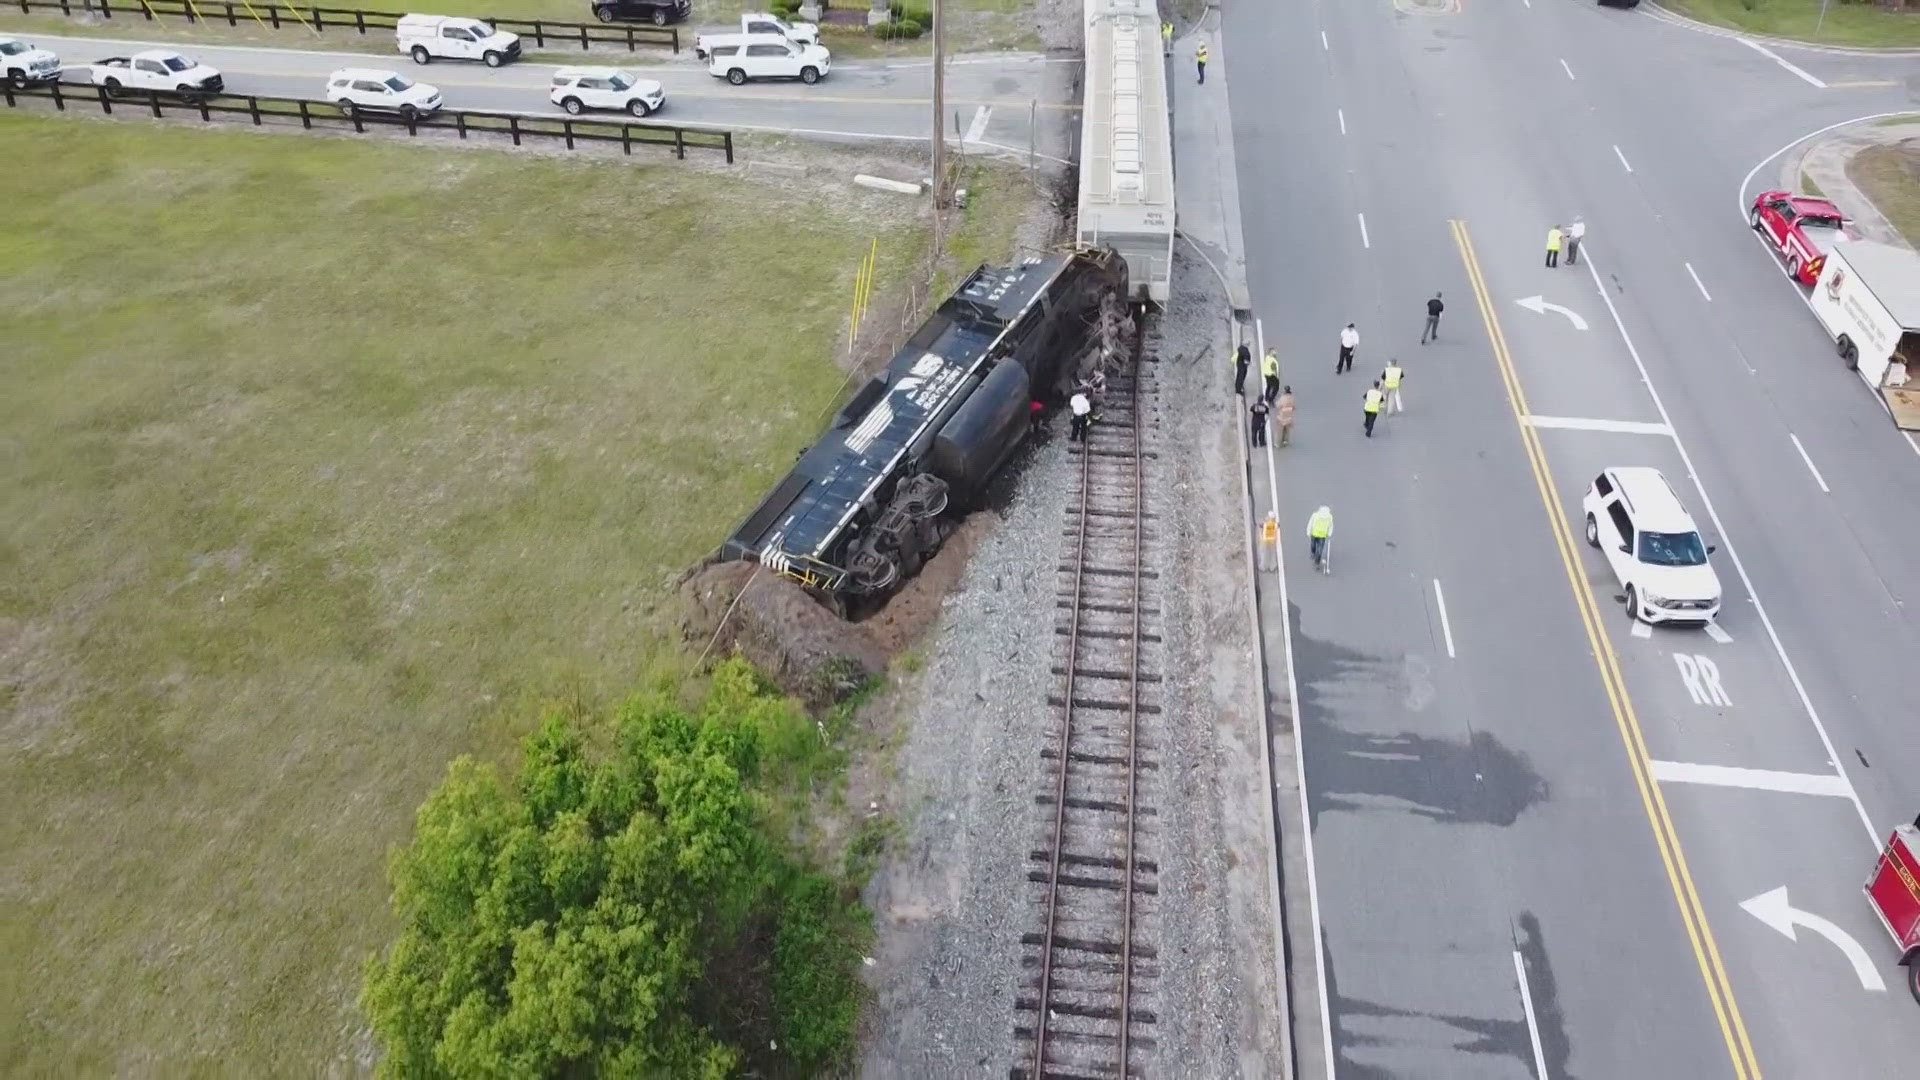 A train derailment in Brunswick led to road closures for several hours.